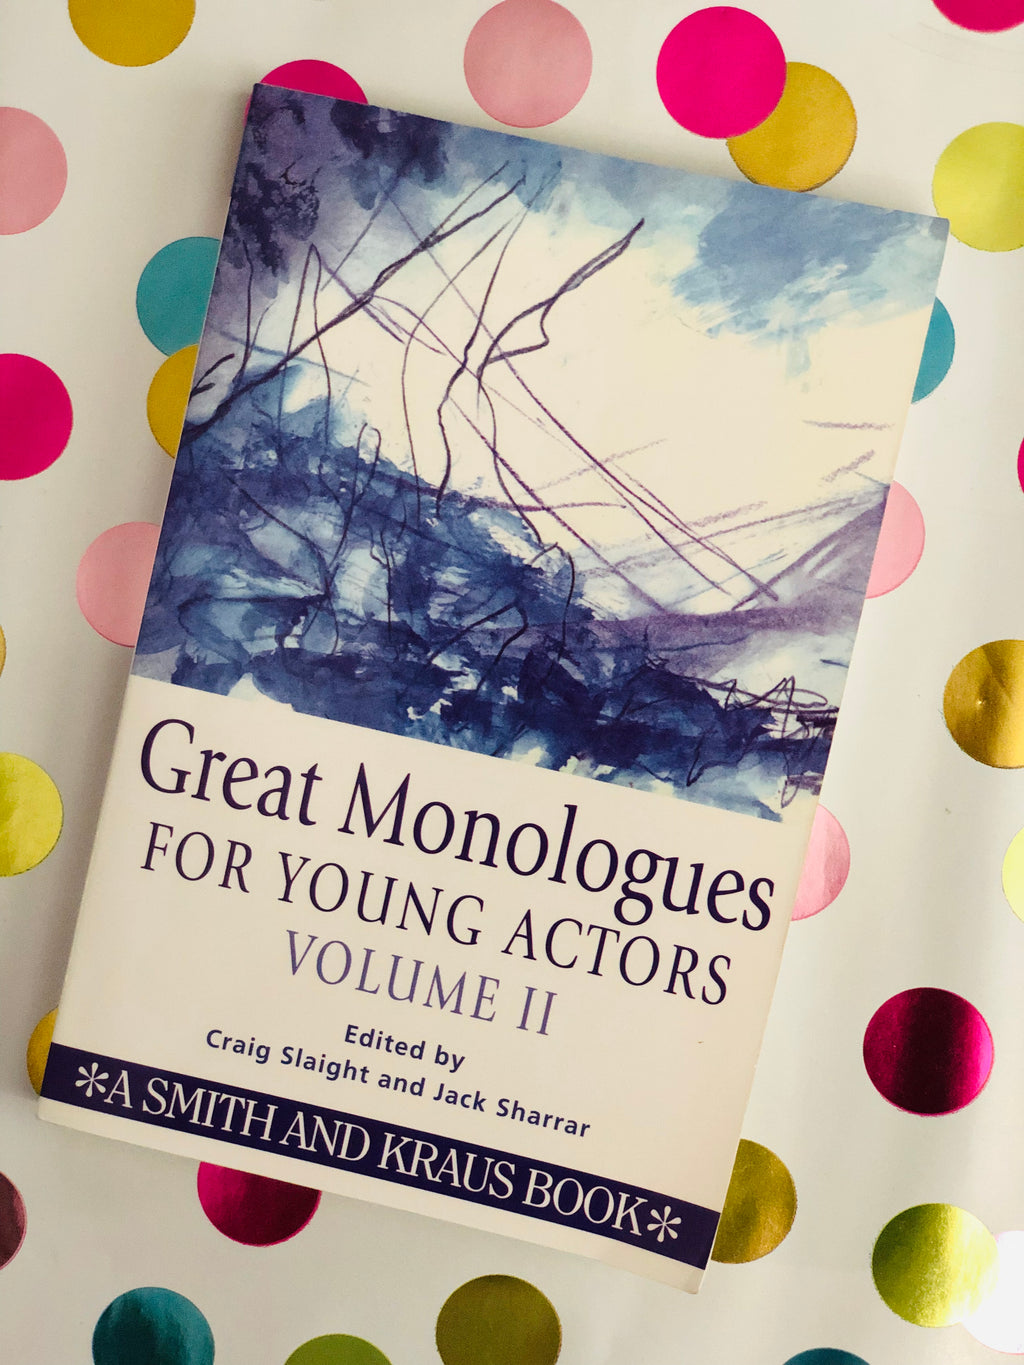 Great Monologues For Young Actors Volume II- By Craig Slaight & Jack Sharrar